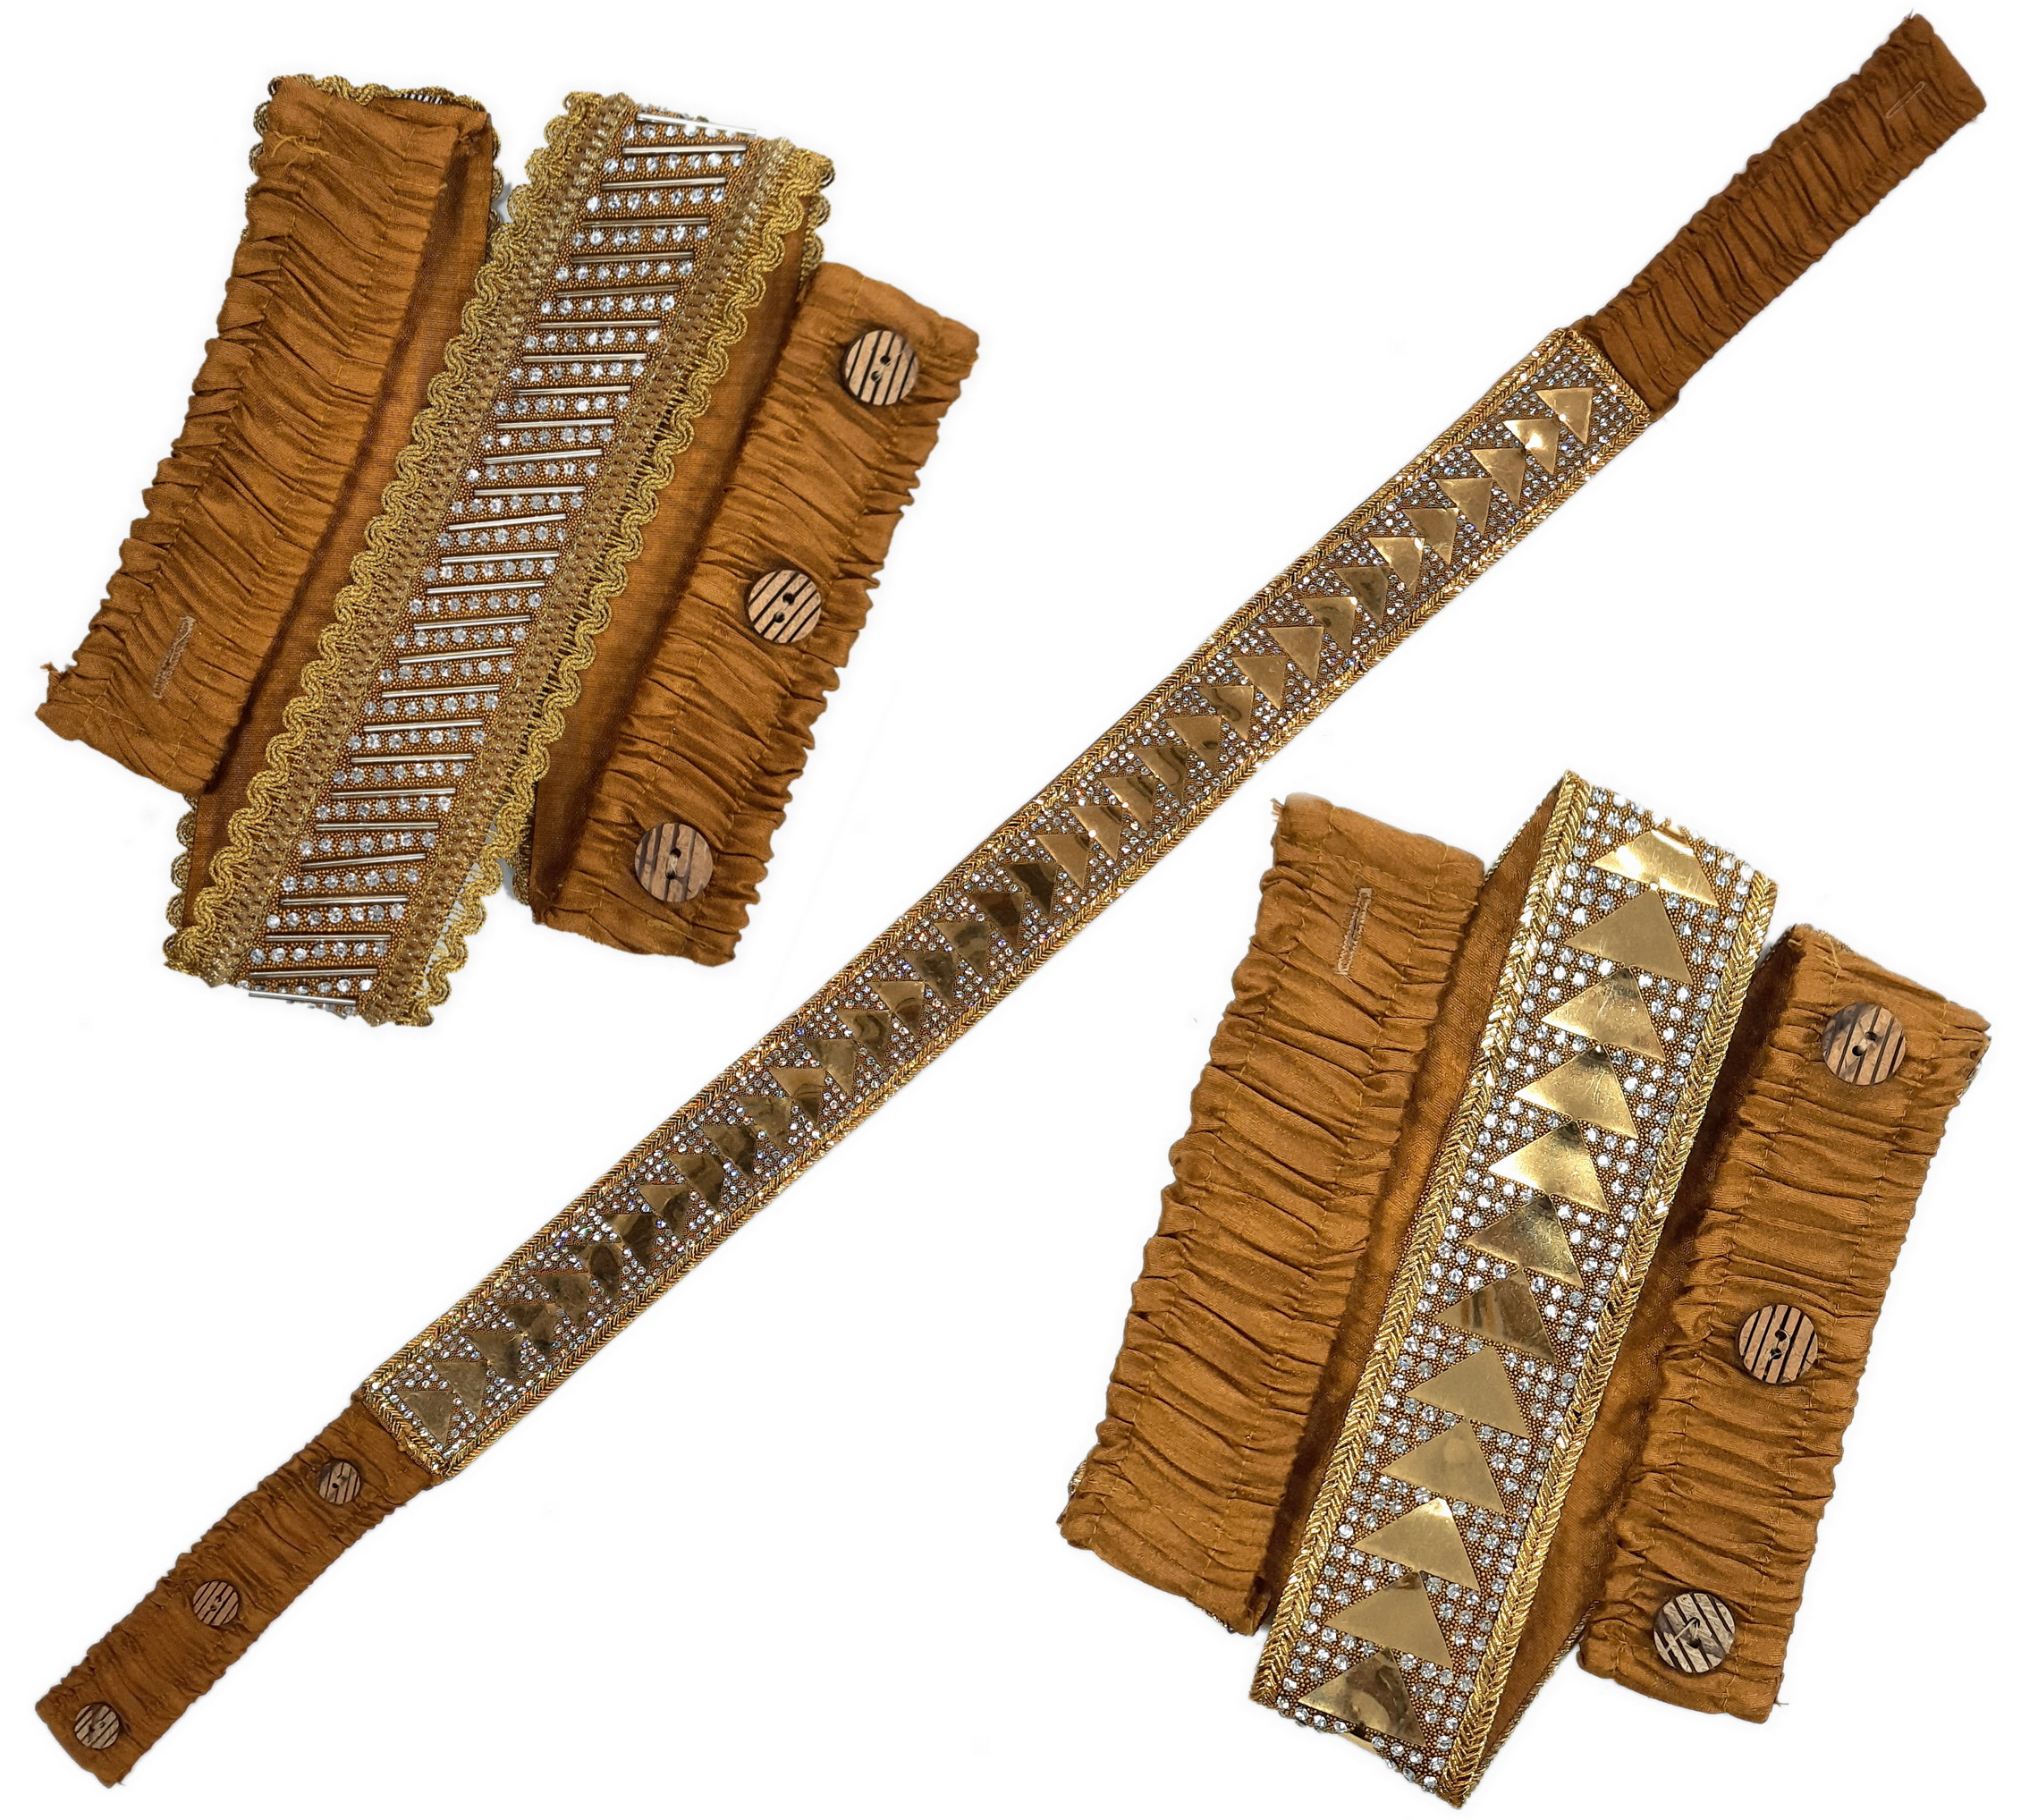 Ladies Waist Belts Manufacturers and Suppliers - Romy Lace - Best Lace Manufacturer in Surat, India